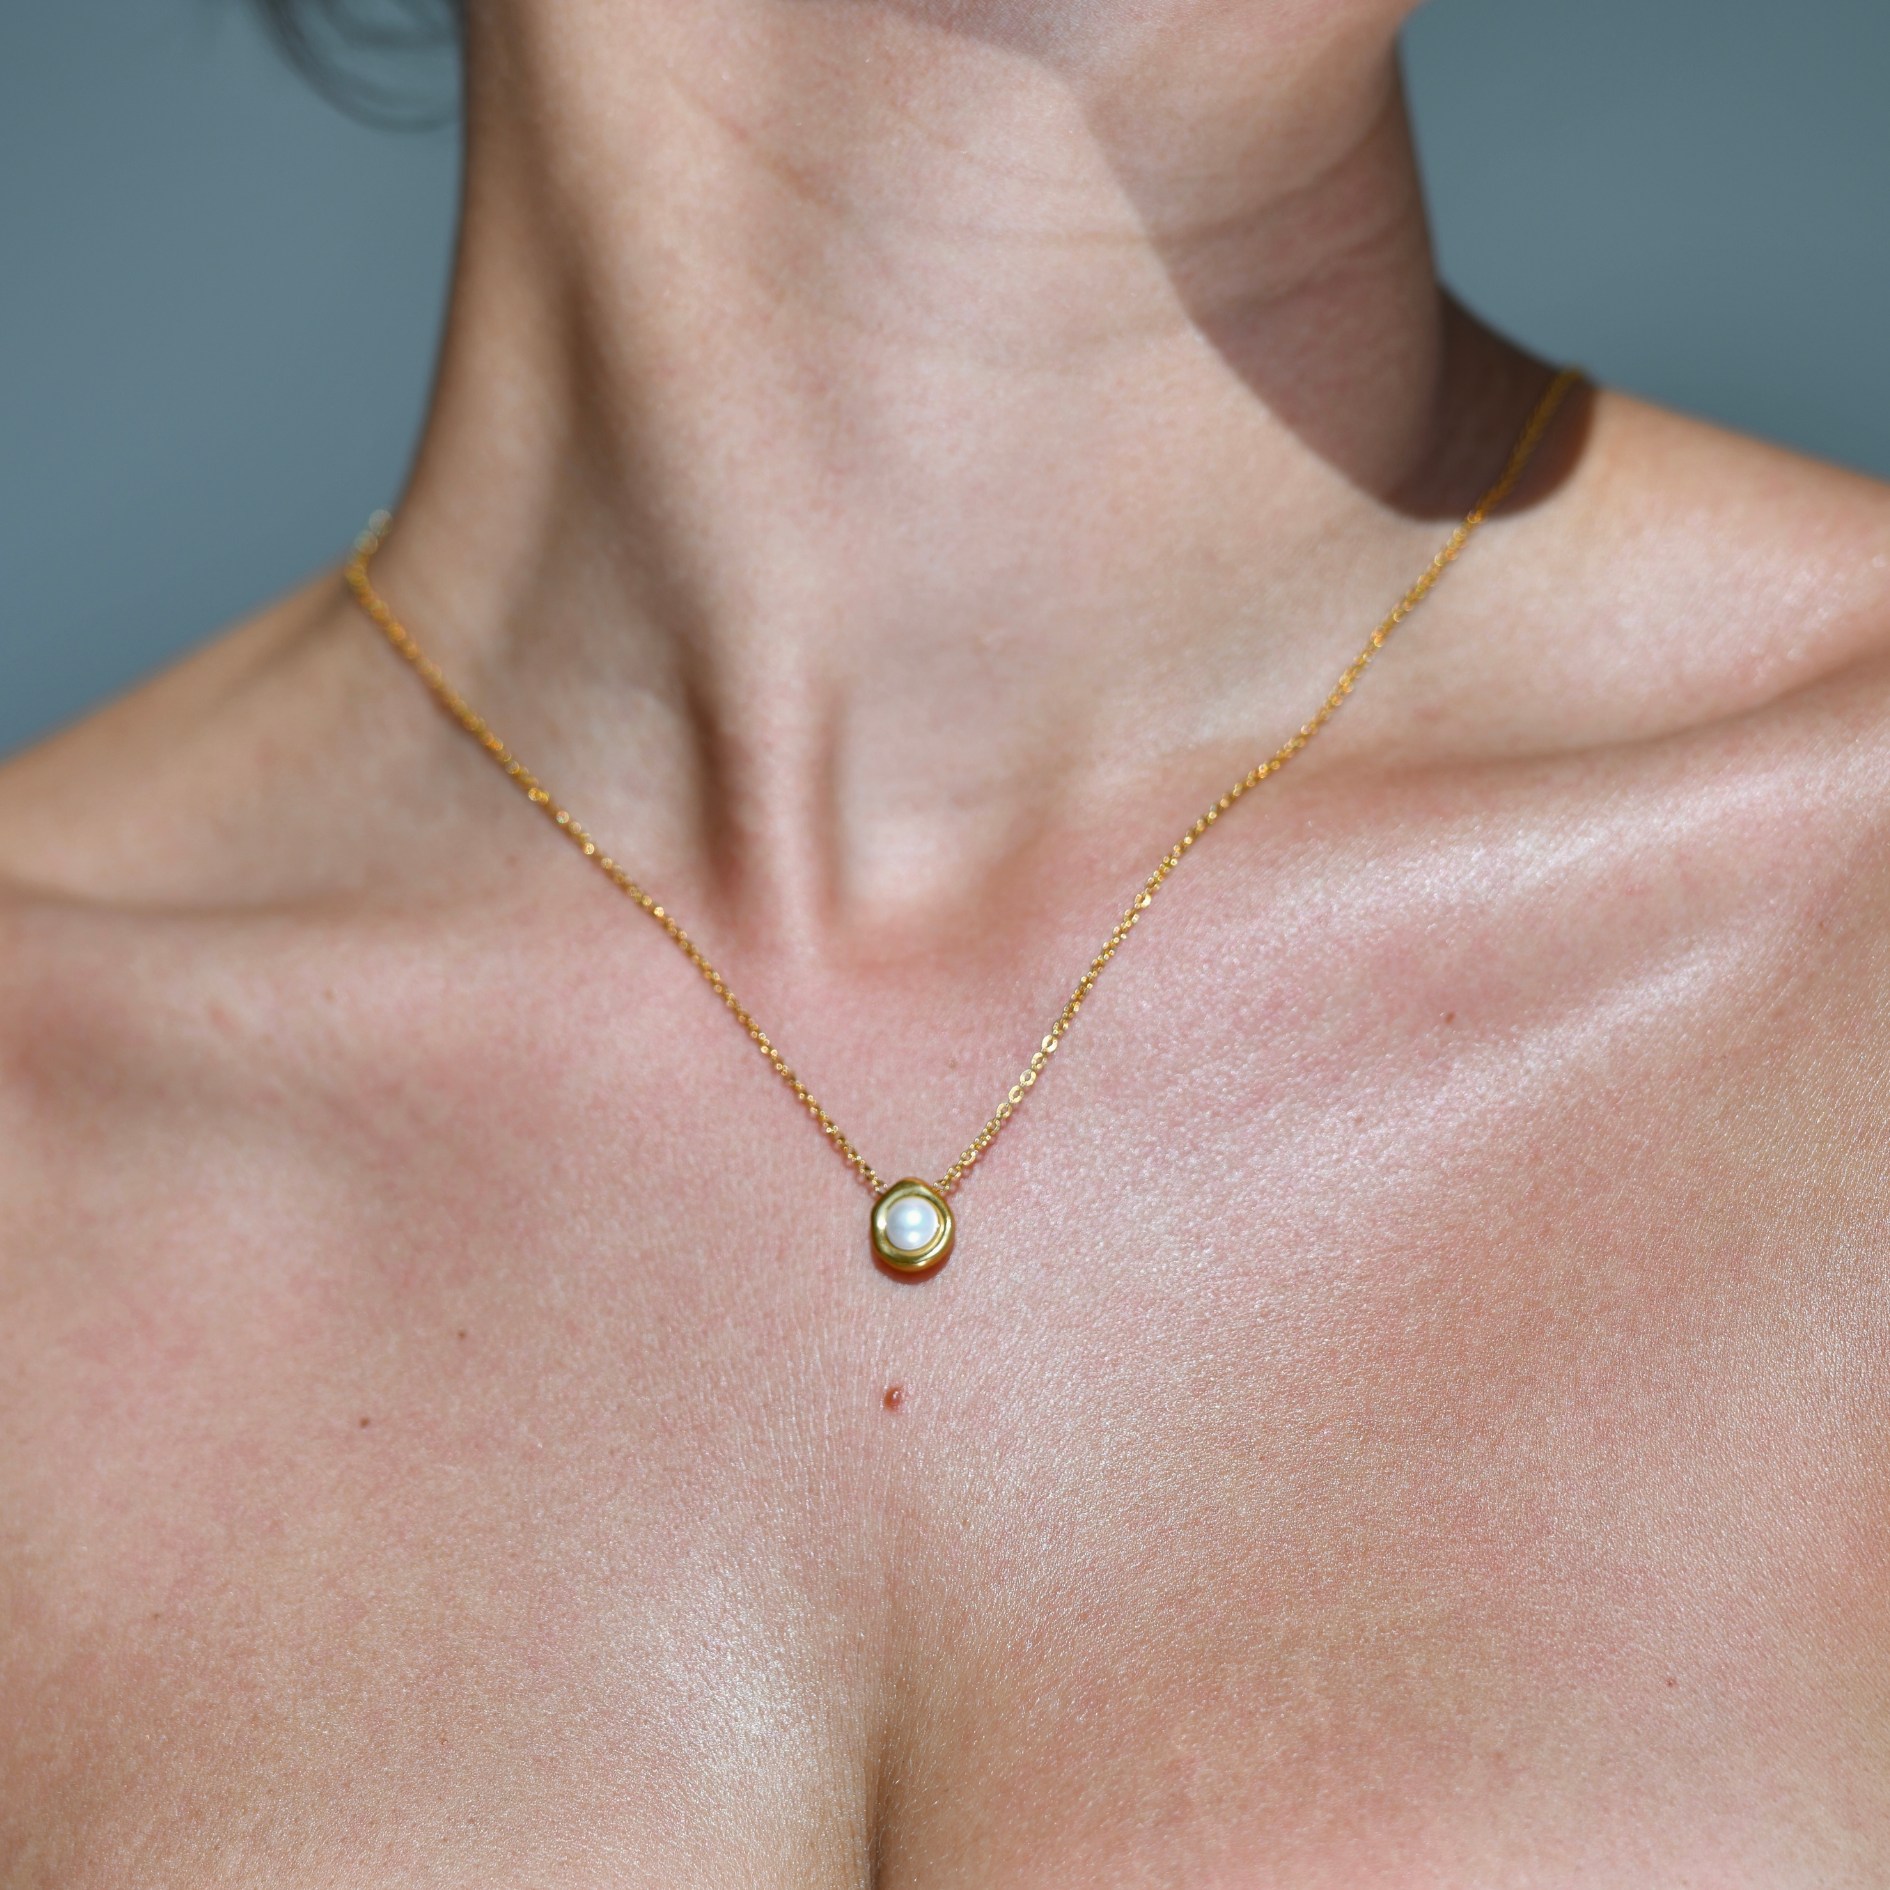 CLAM Pearl Gold Necklace - GOLD plated chain with a small pendant. Gold oval irregular shape with a white pearl in the middle.